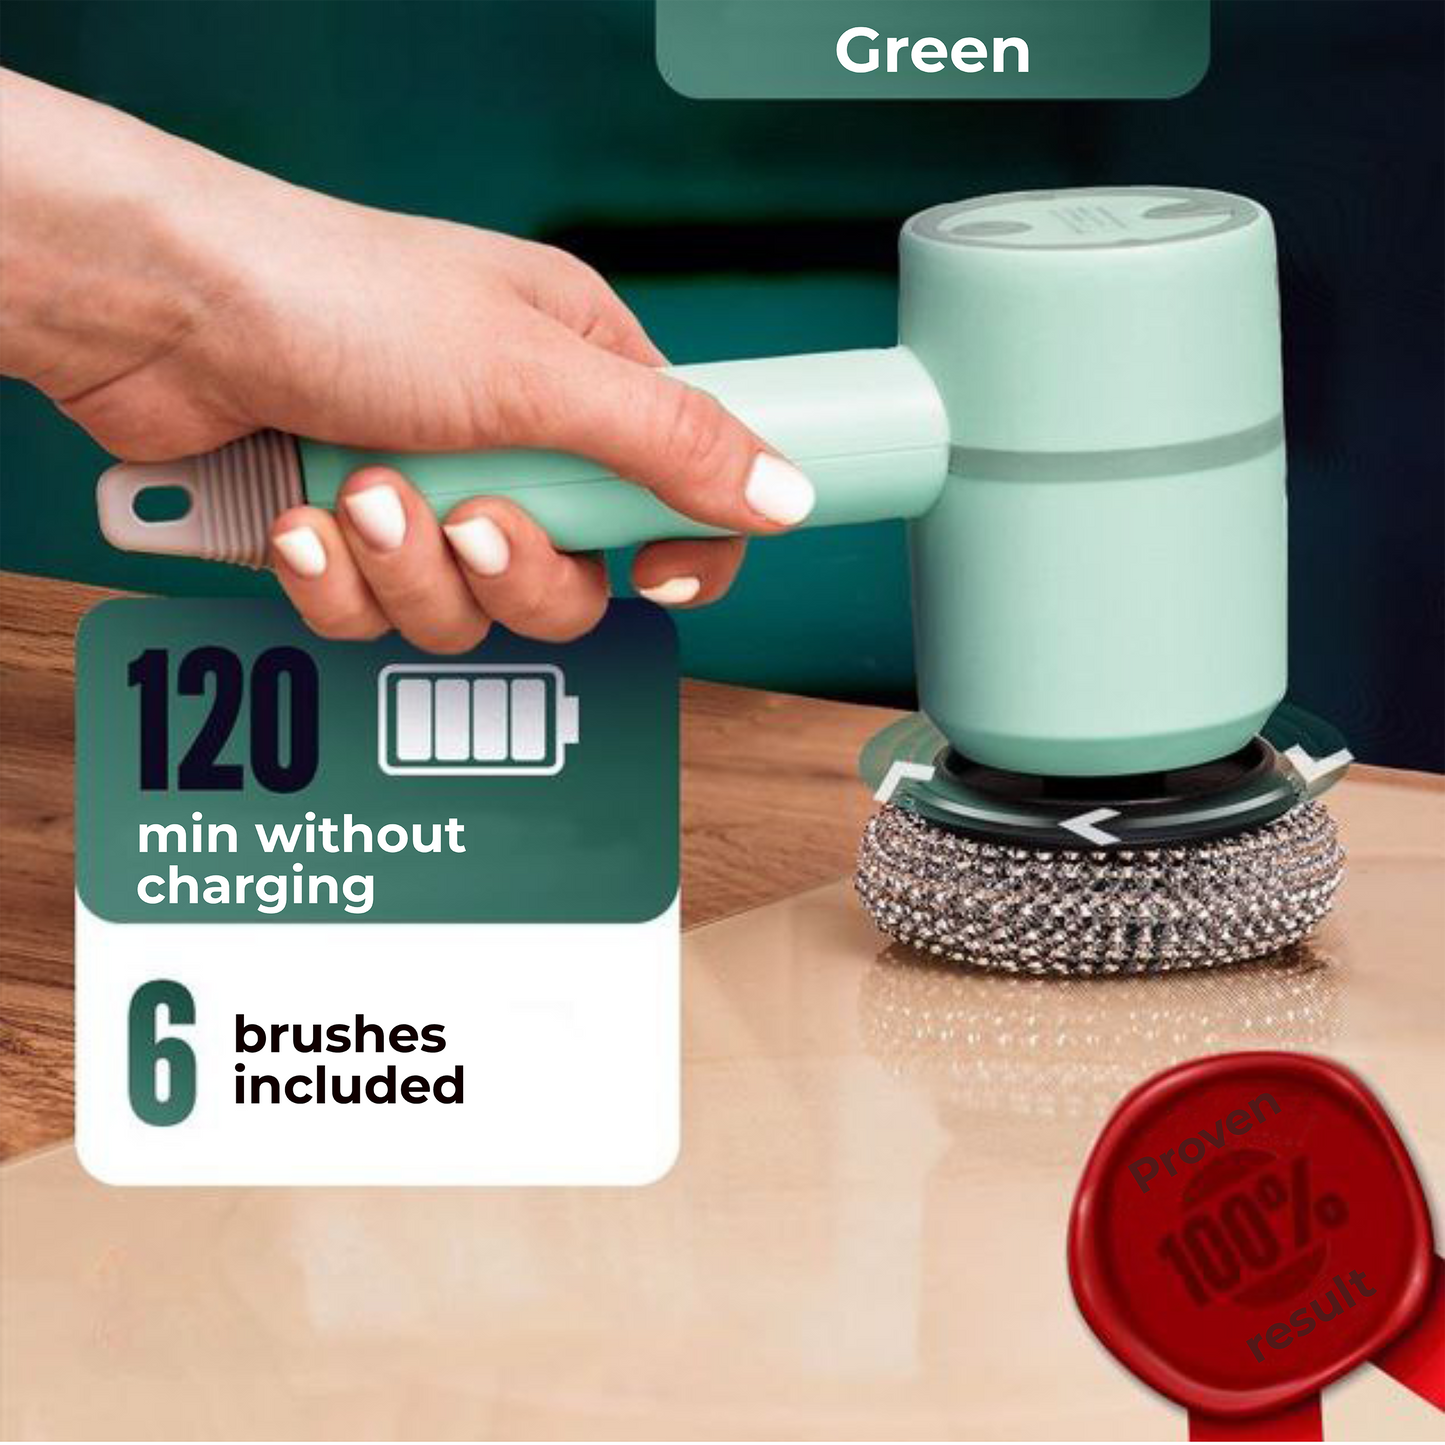 "Hand holding a green cleaning device offering 120 minutes of use without charging, with six brushes included, on a sparkling clean surface"